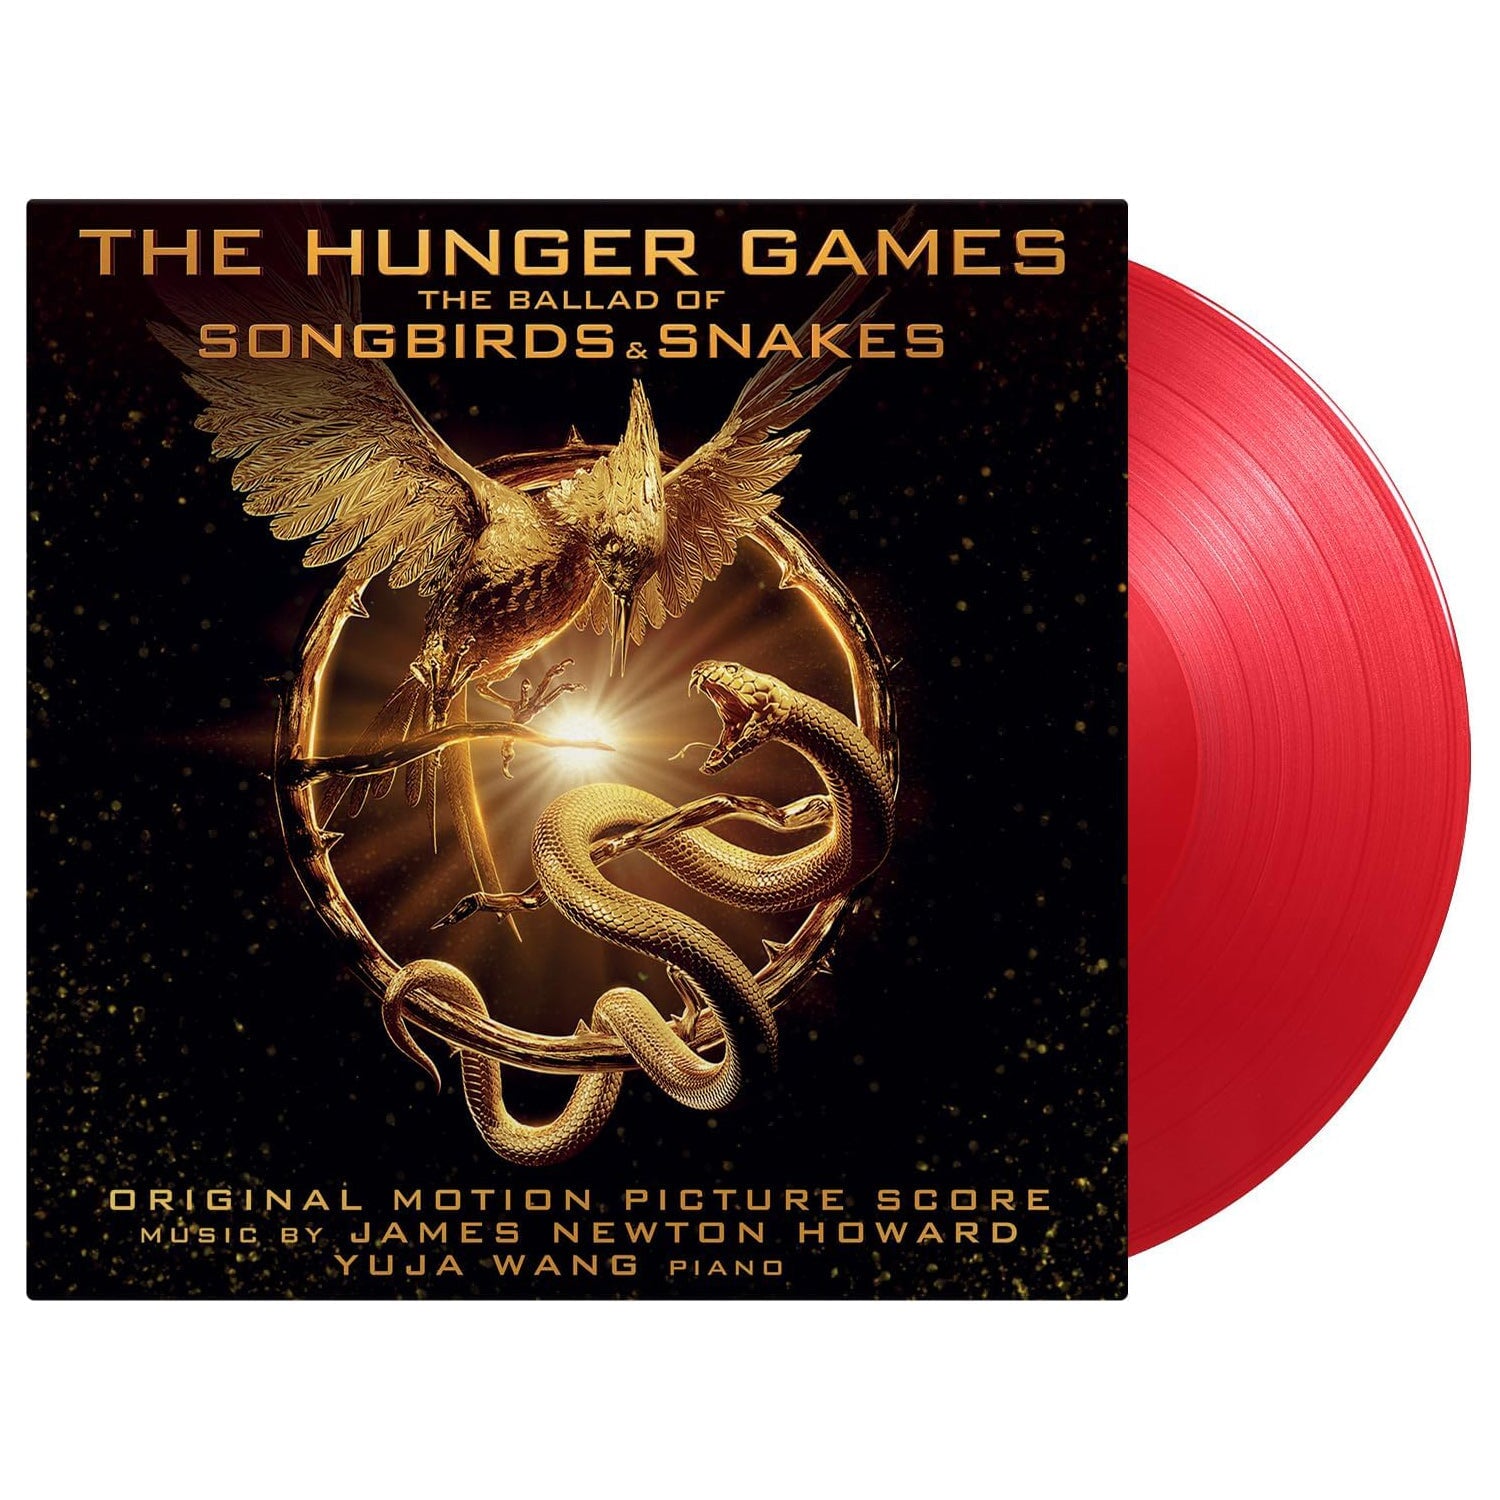 The Hunger Games: The Ballad of Songbirds & Snakes (Original Motion Picture Score) (Red Vinyl 2 LP)